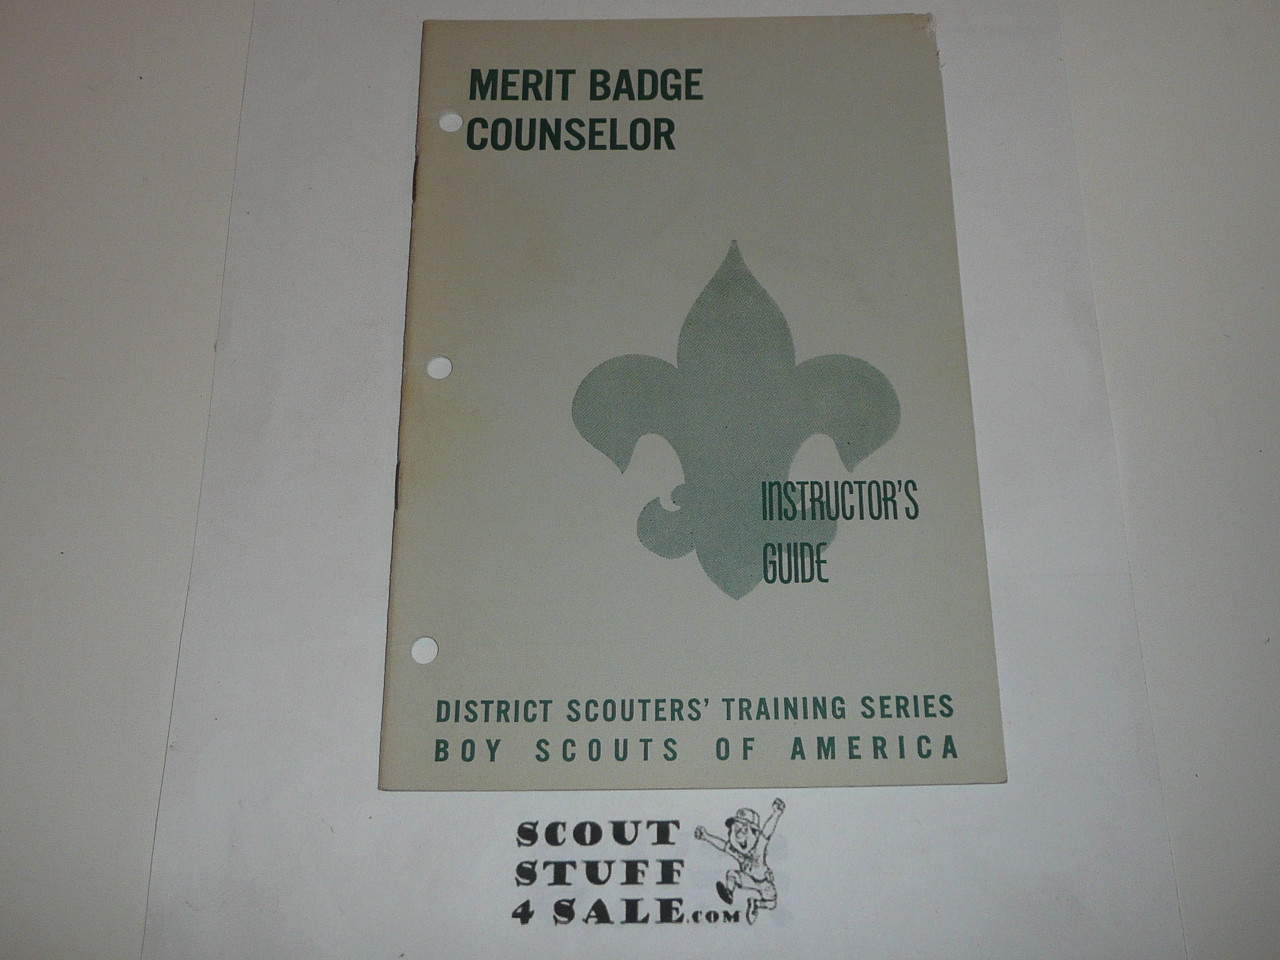 District Scouter's Training Series, Merit Badge Counselor Instructor's Guide, 8-59 printing